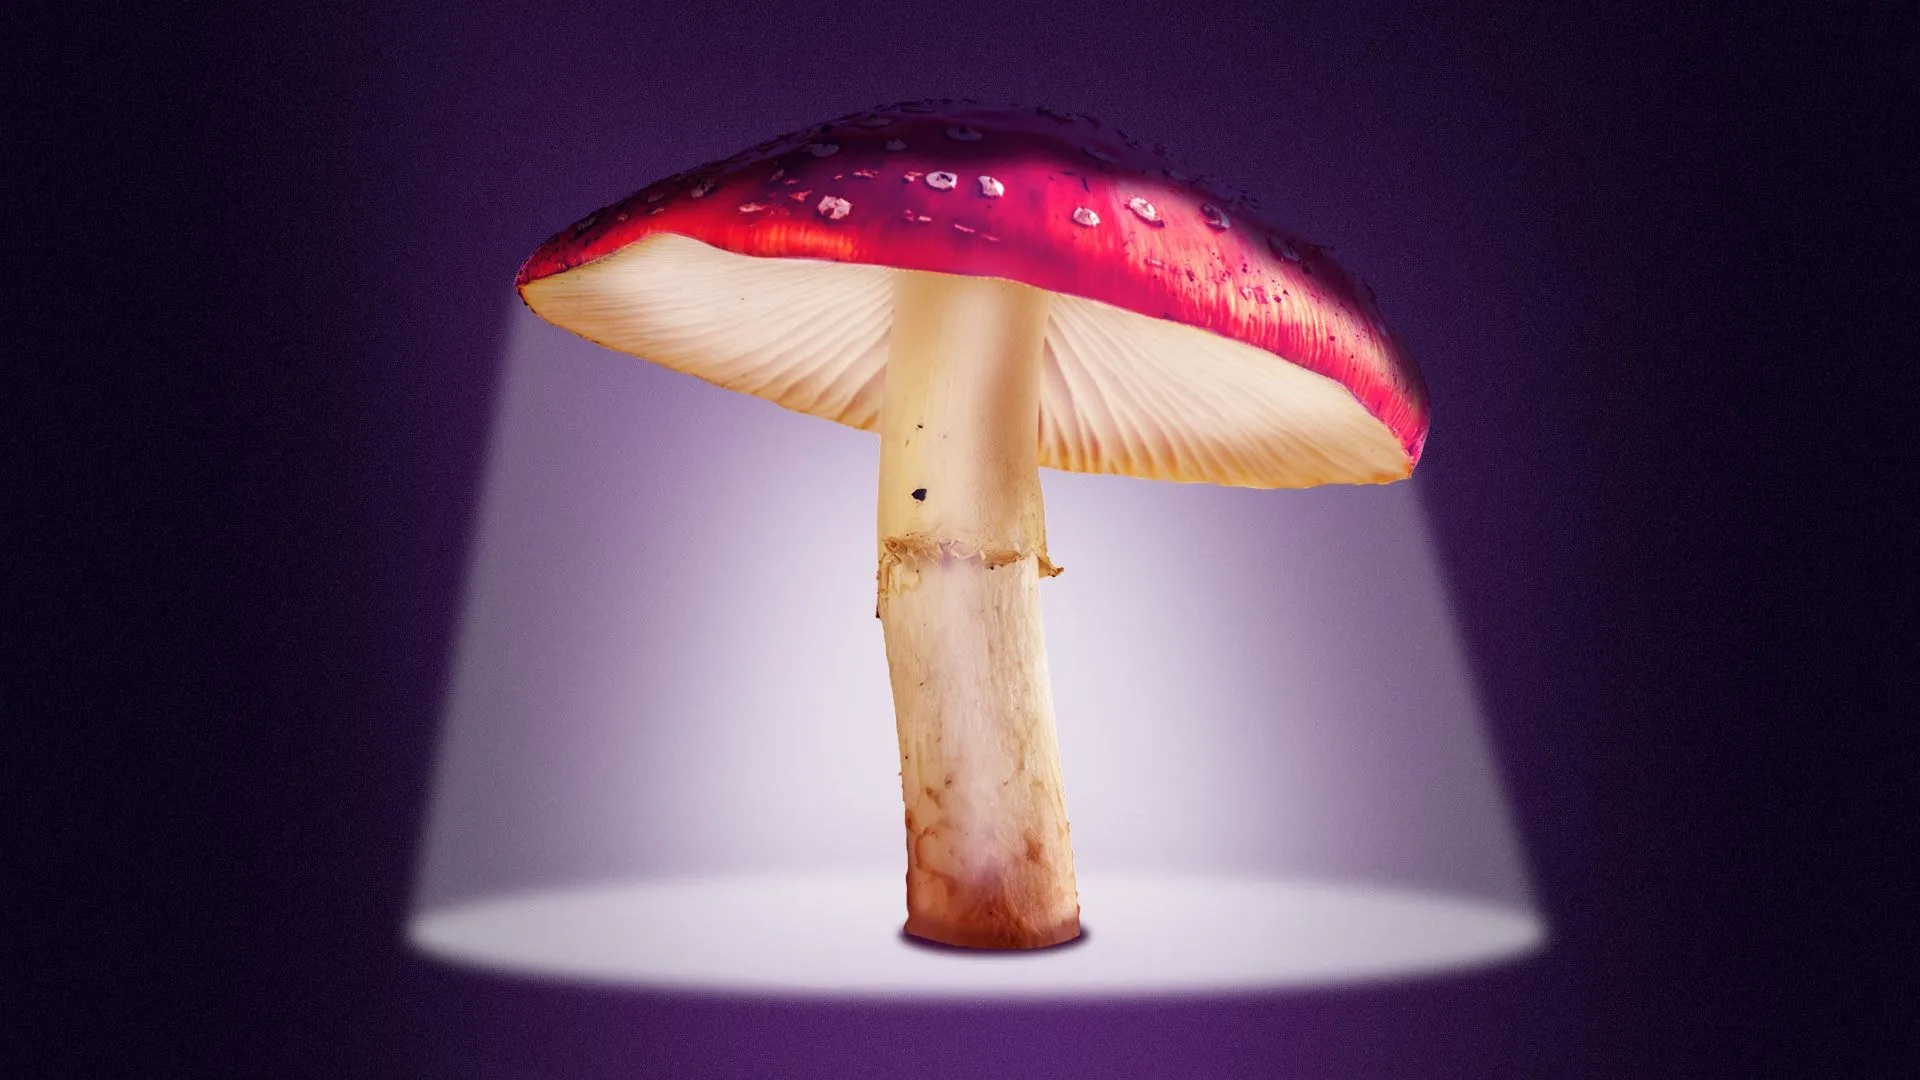 Study Reveals Mushrooms Are the Most Used Psychedelic Substance in the U.S.